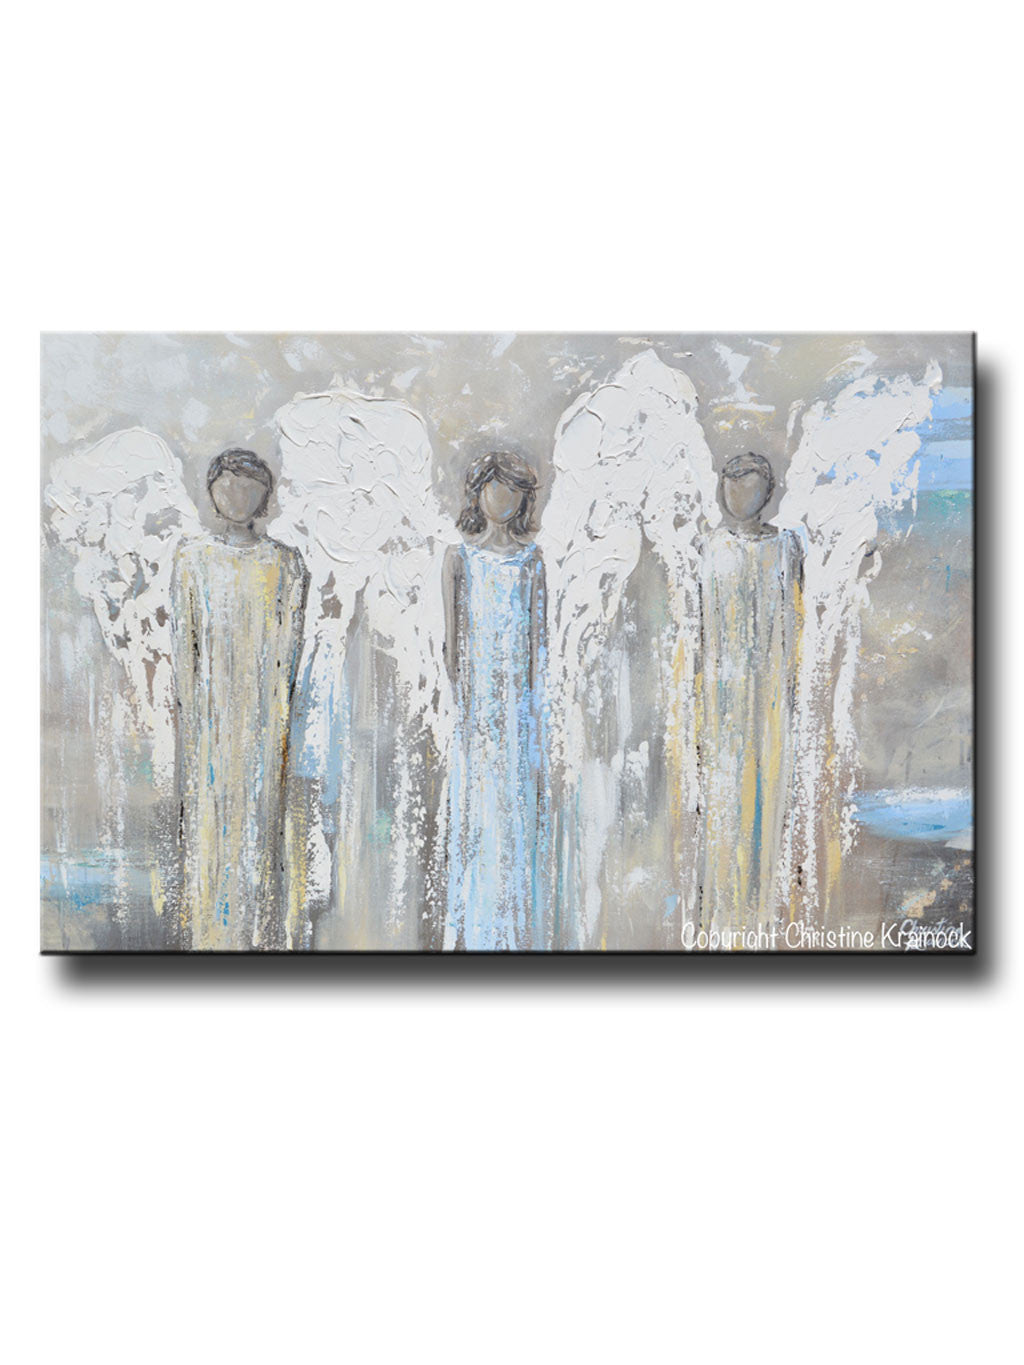 ORIGINAL Angel Painting Abstract 3 Angels Guardian Textured Grey Gold Home Decor Wall Art 36x24"